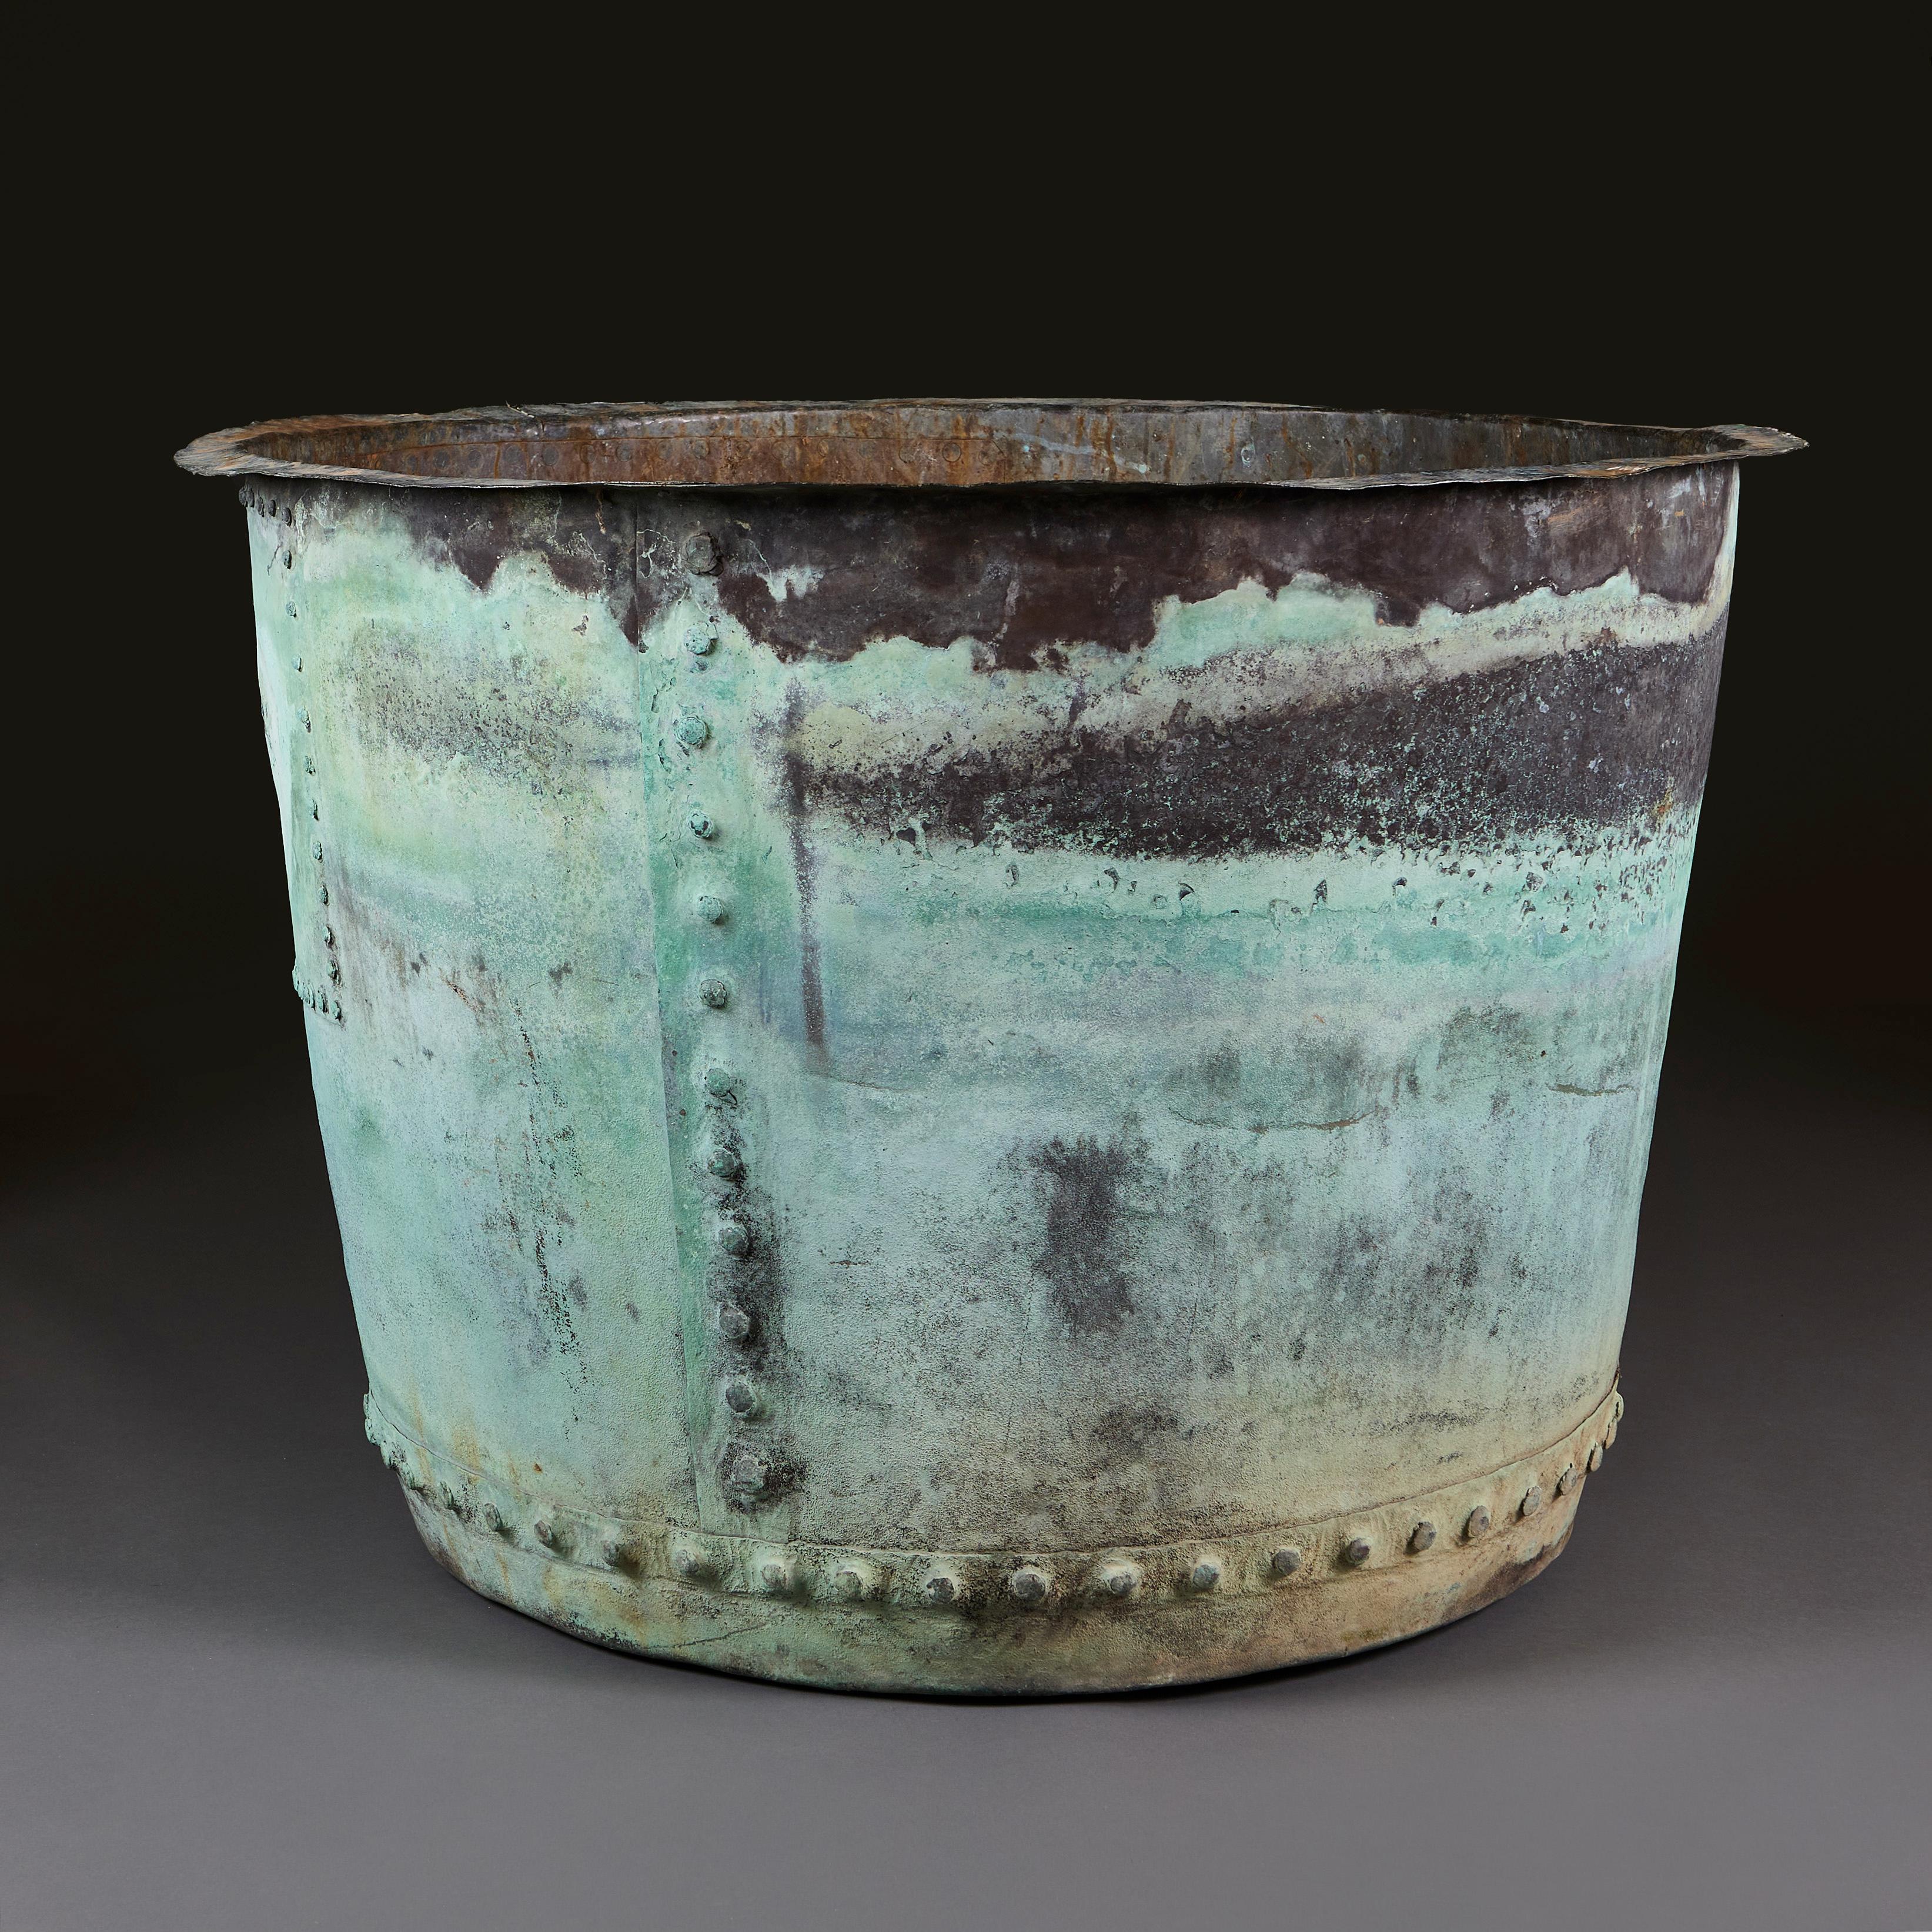 England, circa 1880

A very large late 19th century copper planter of circular form, with veridigris patination throughout, with circular rivits to the joins.

Measures: Height 72.00cm
Diameter 102.00cm.